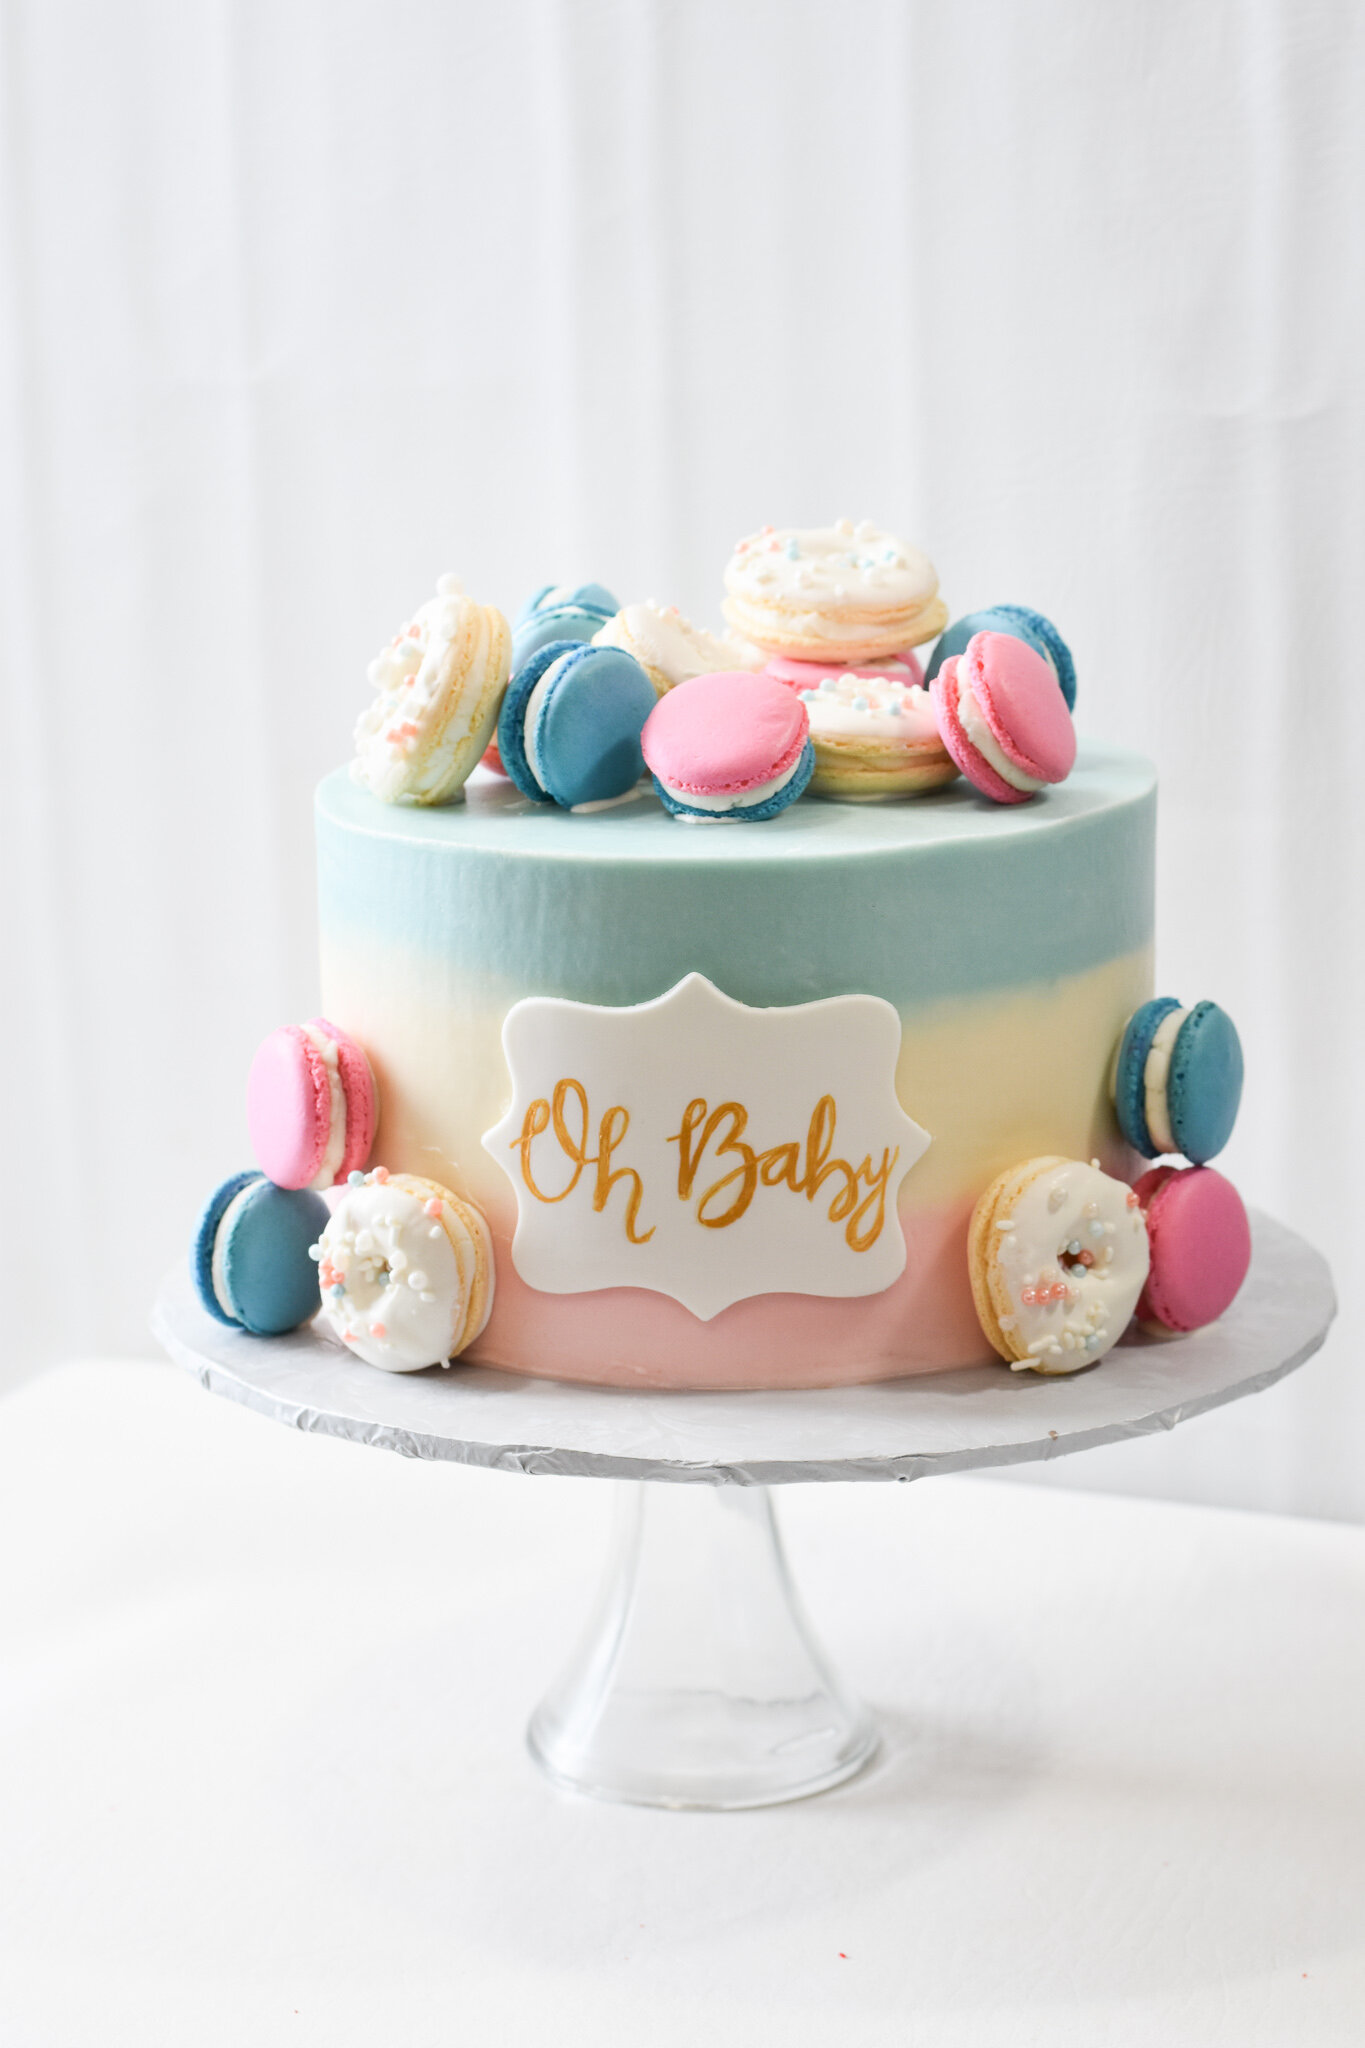 15 Precious Girl Baby Shower Cakes - Find Your Cake Inspiration